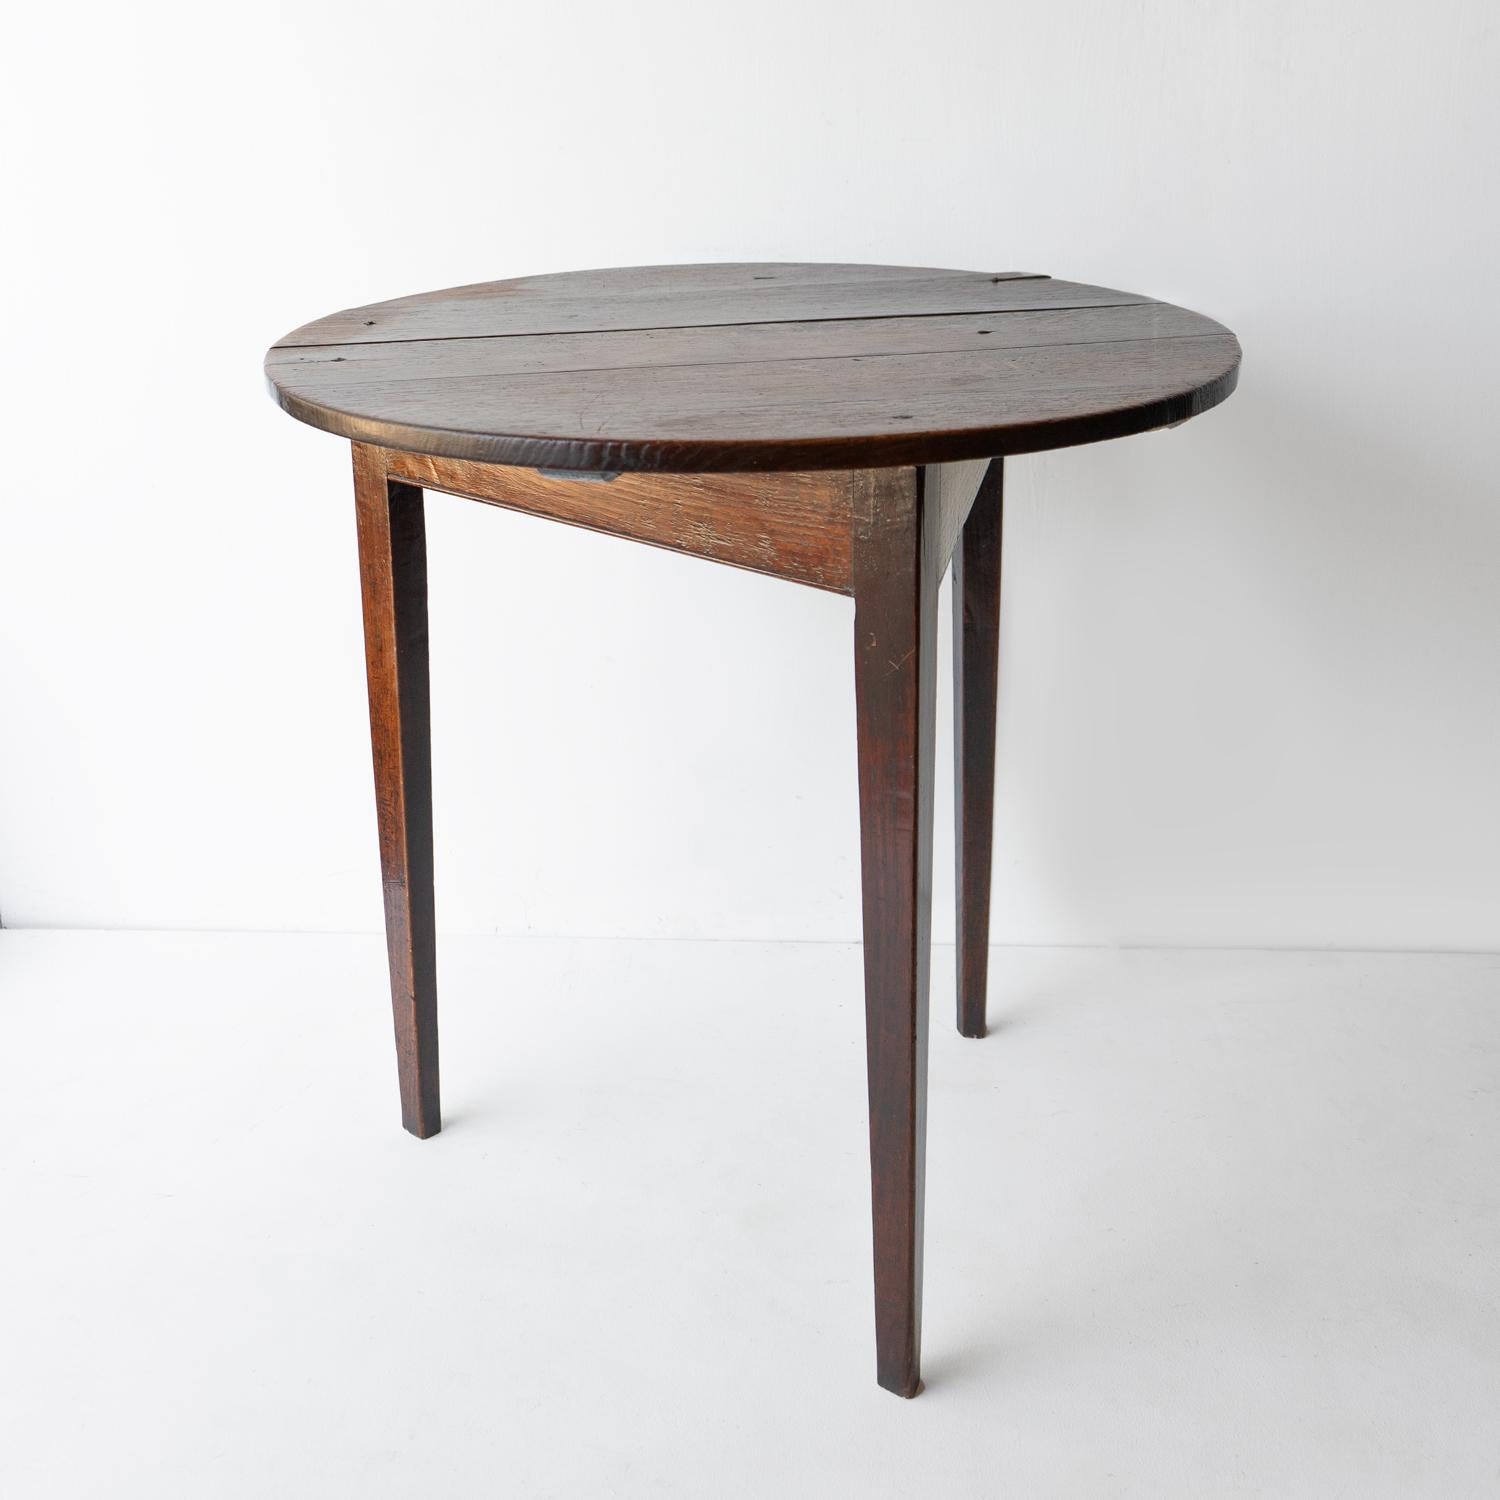 ANTIQUE RUSTIC WOODEN CIRCULAR ‘CRICKET’ TABLE
Of simple form with a four-plank circular oak top over a simple apron peg joined with three quad-form tapering legs.

A lovely rich patina to the oak with rich golden tones.

Would work well as either a